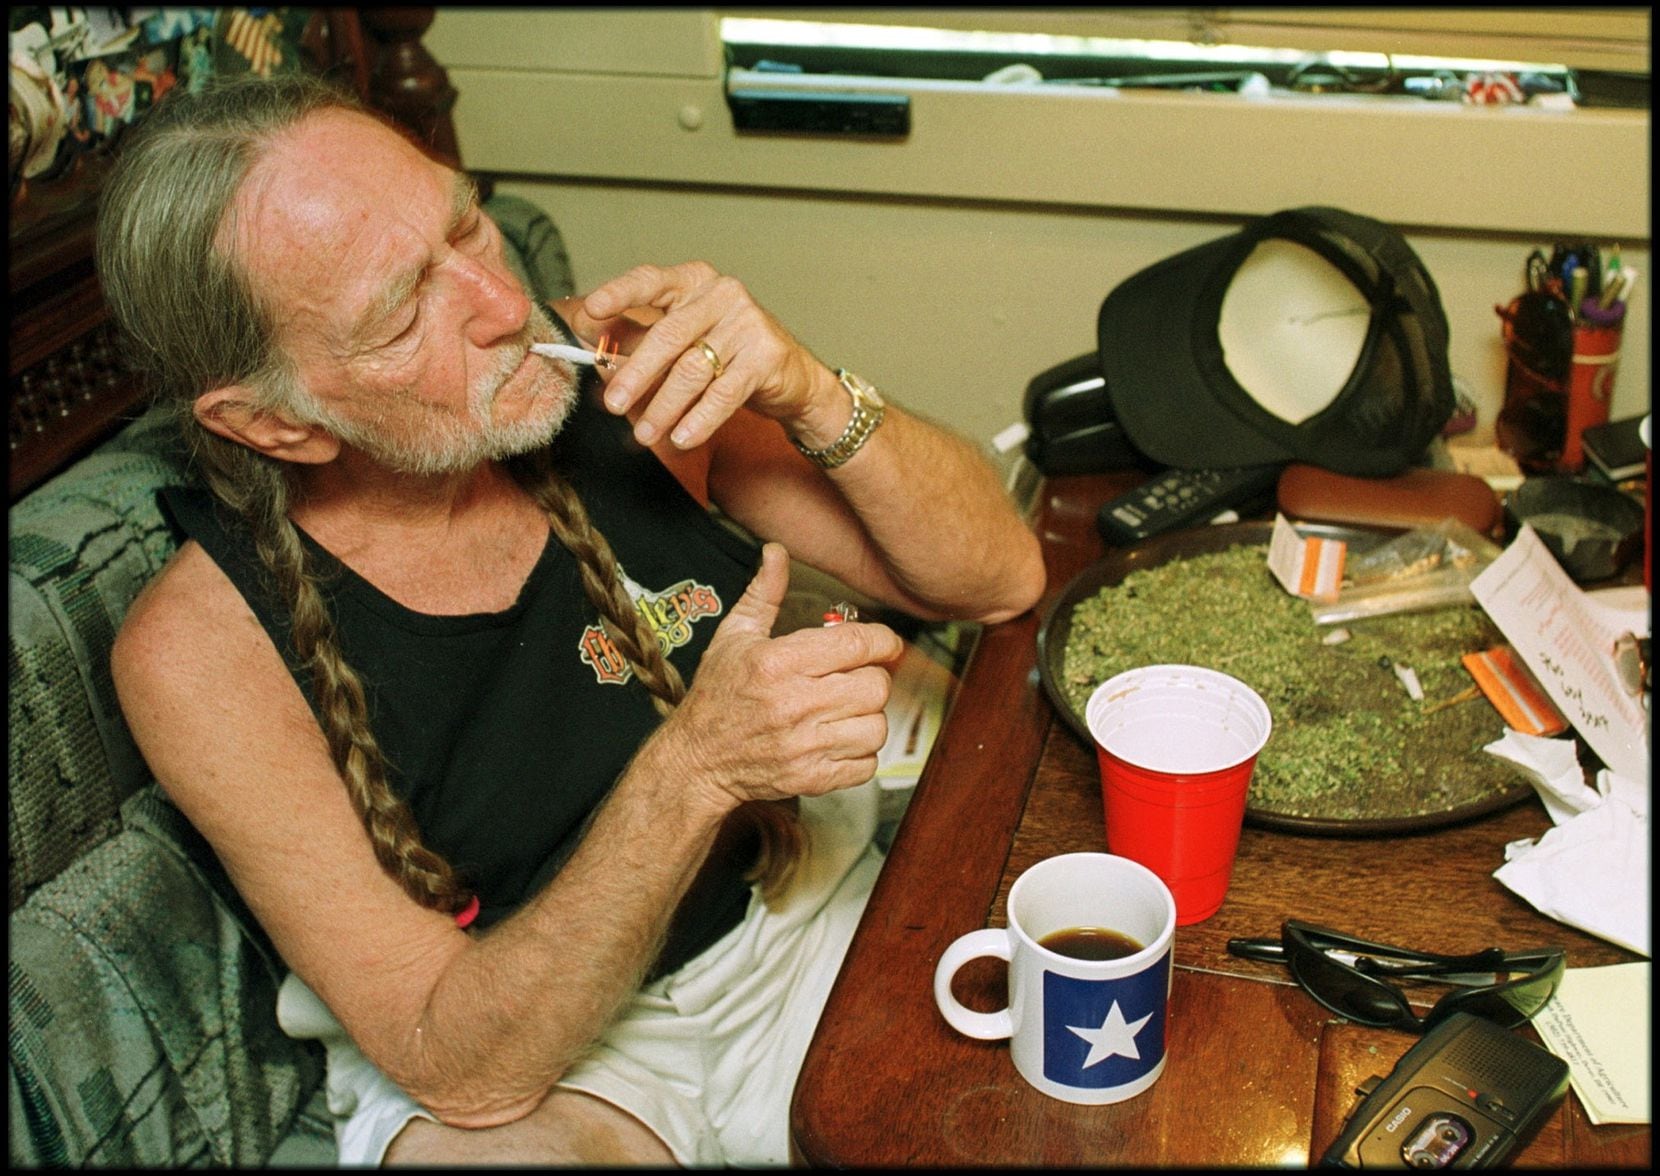 Willie Nelson takes a drag off a joint while relaxing at his home in Texas in the 2000s.